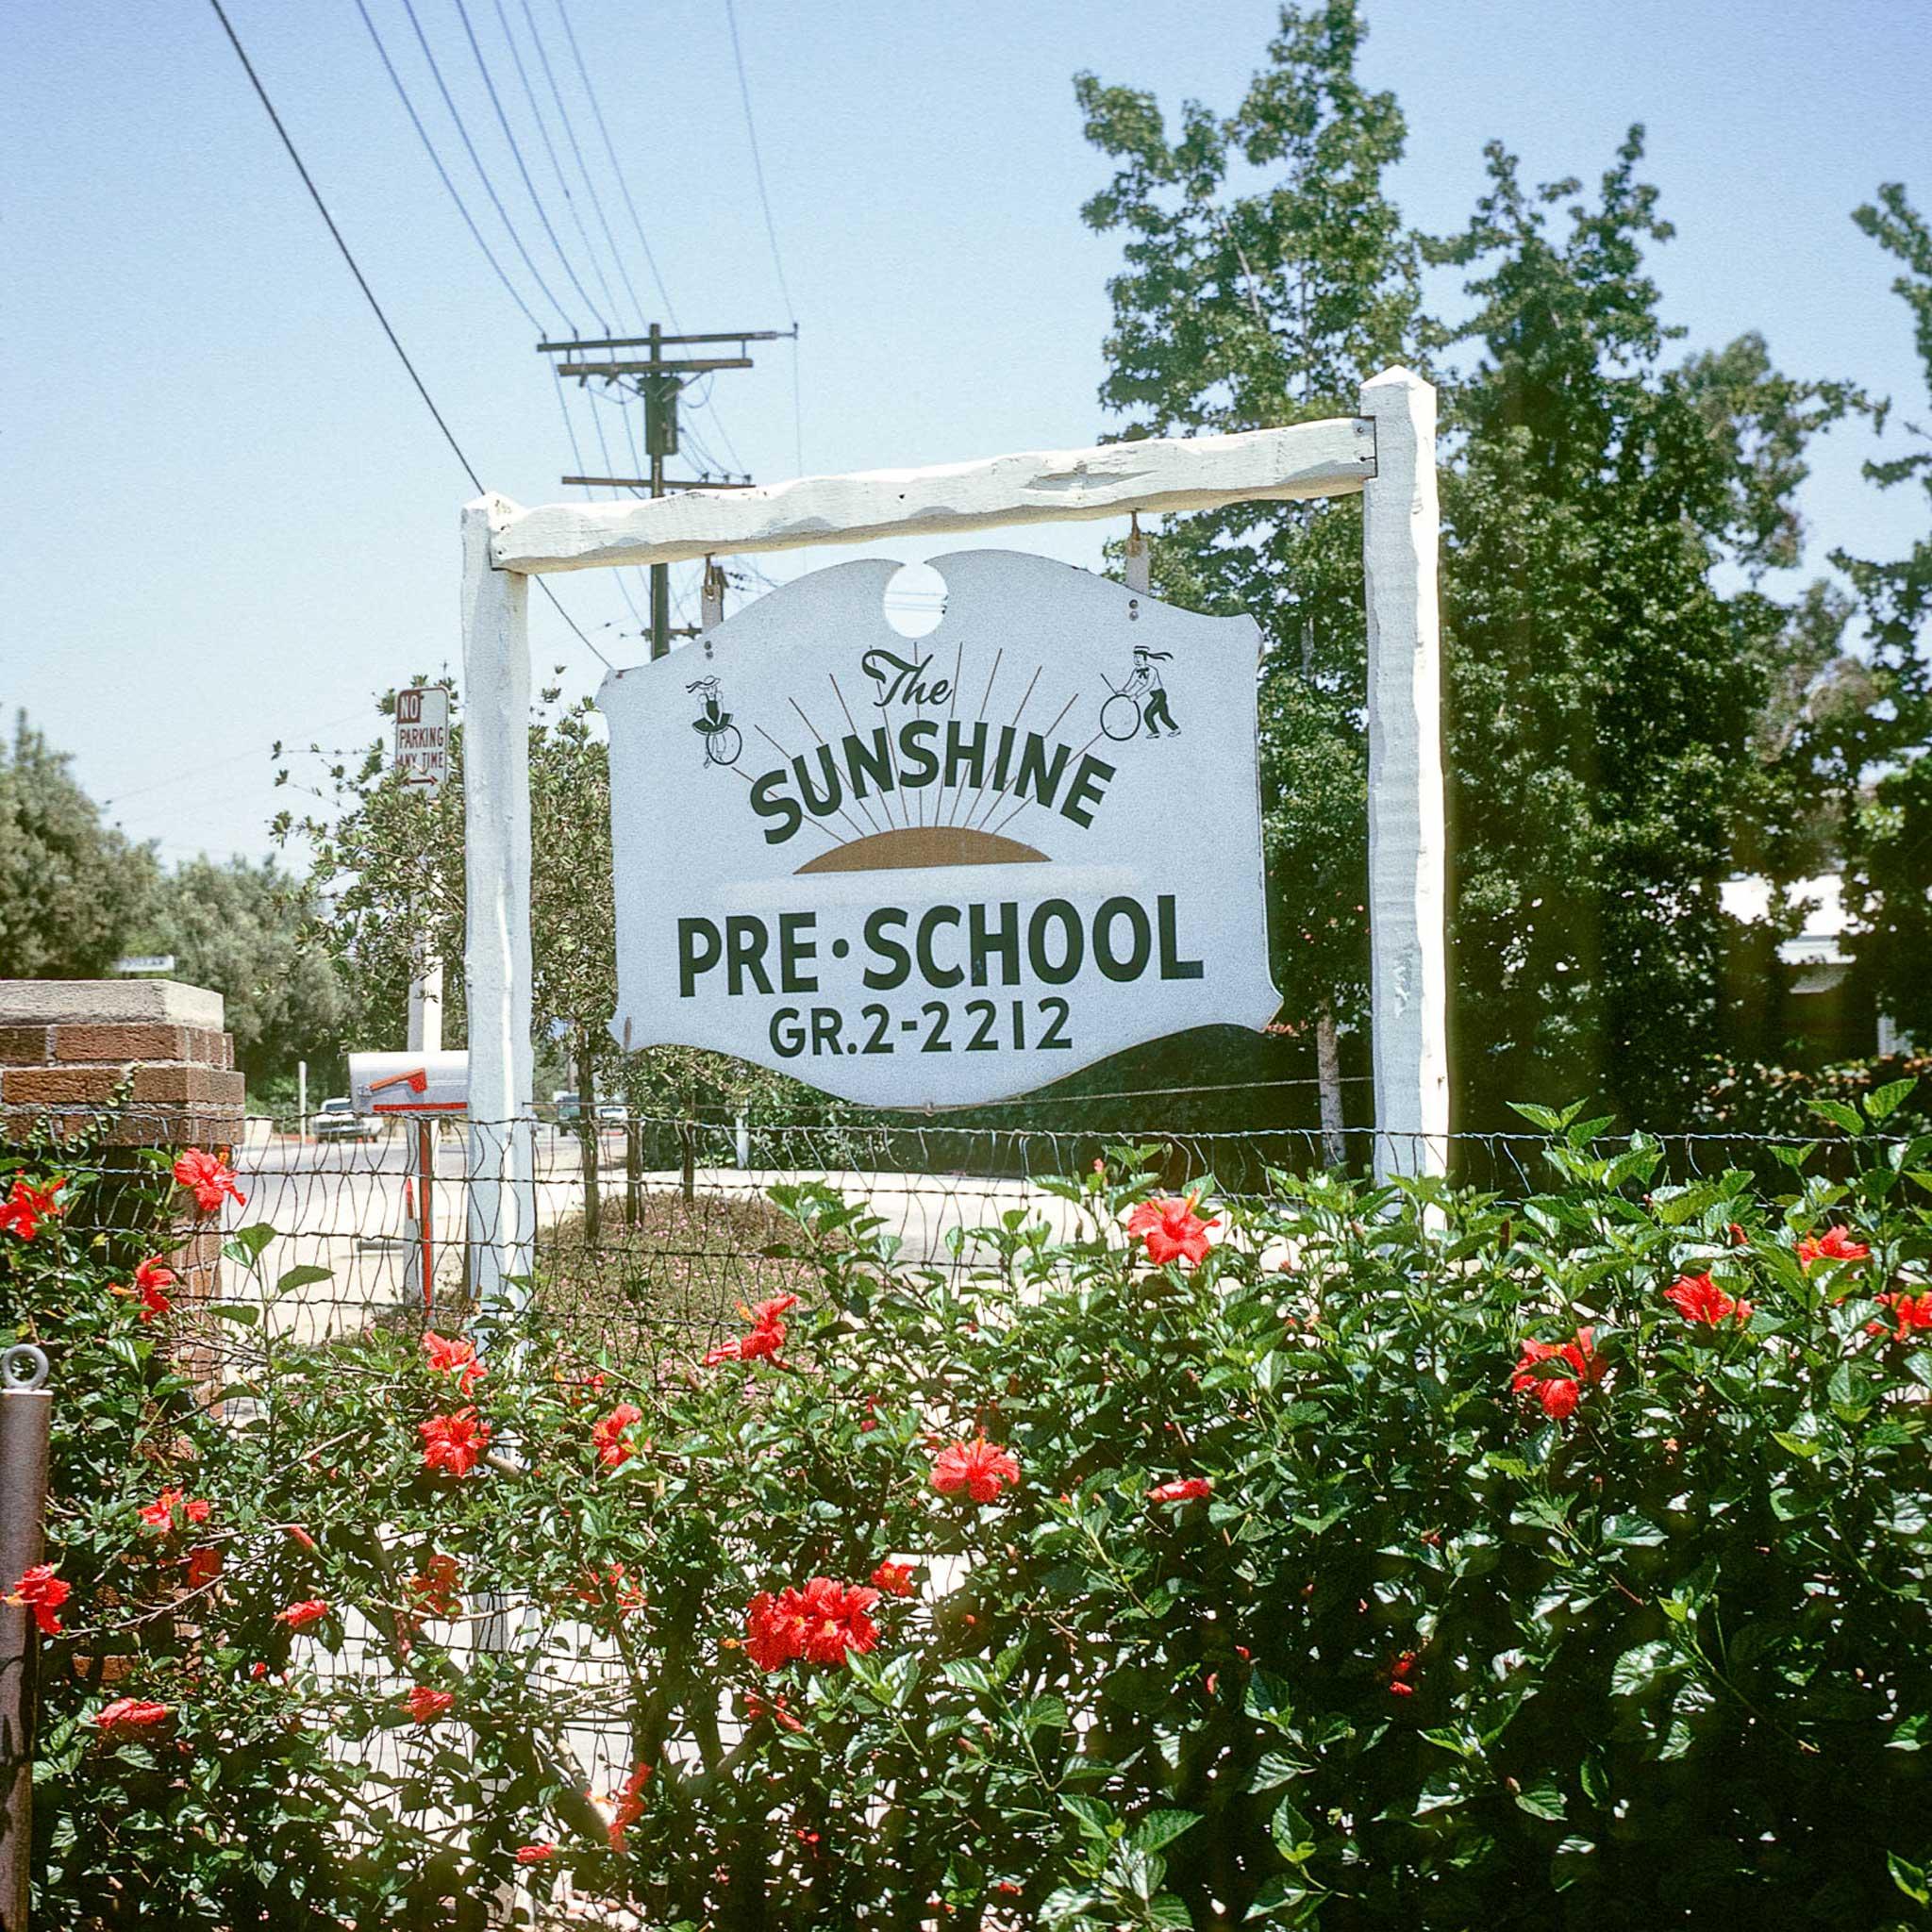 A sign that says "The Sunshine Pre-School" above a rose bush